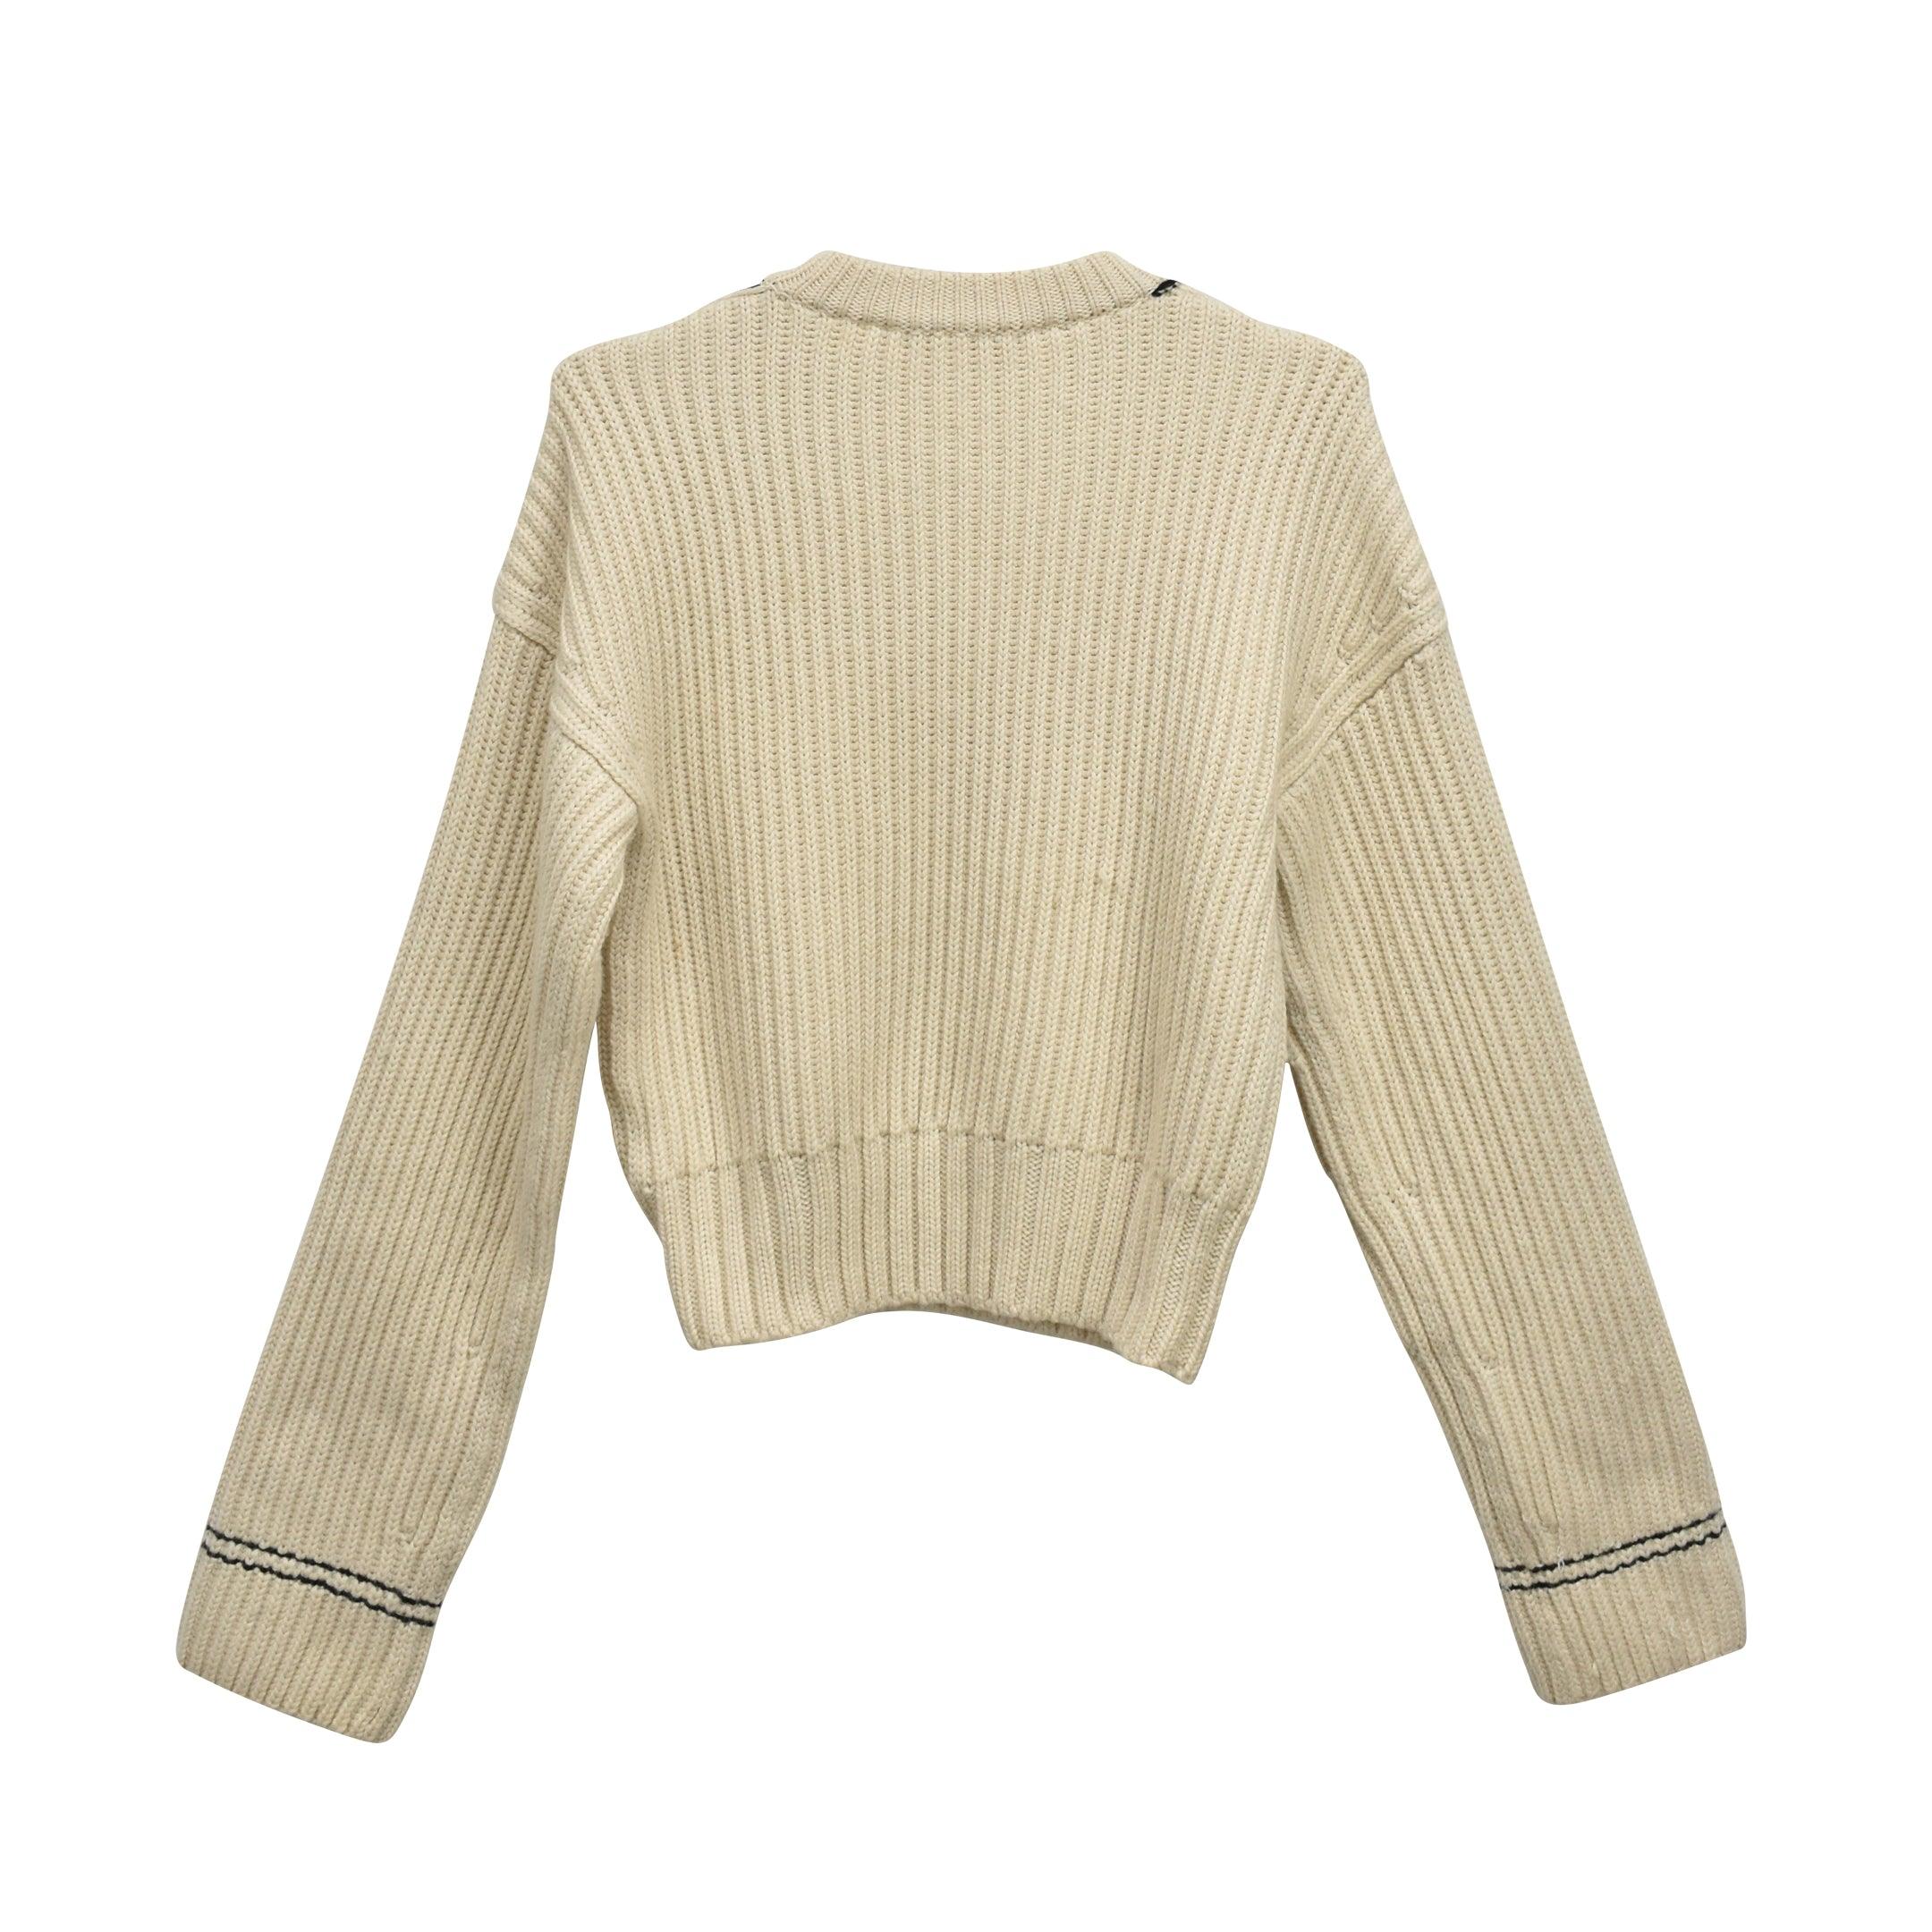 Acne Studios Pullover Sweater - Women's S - Fashionably Yours